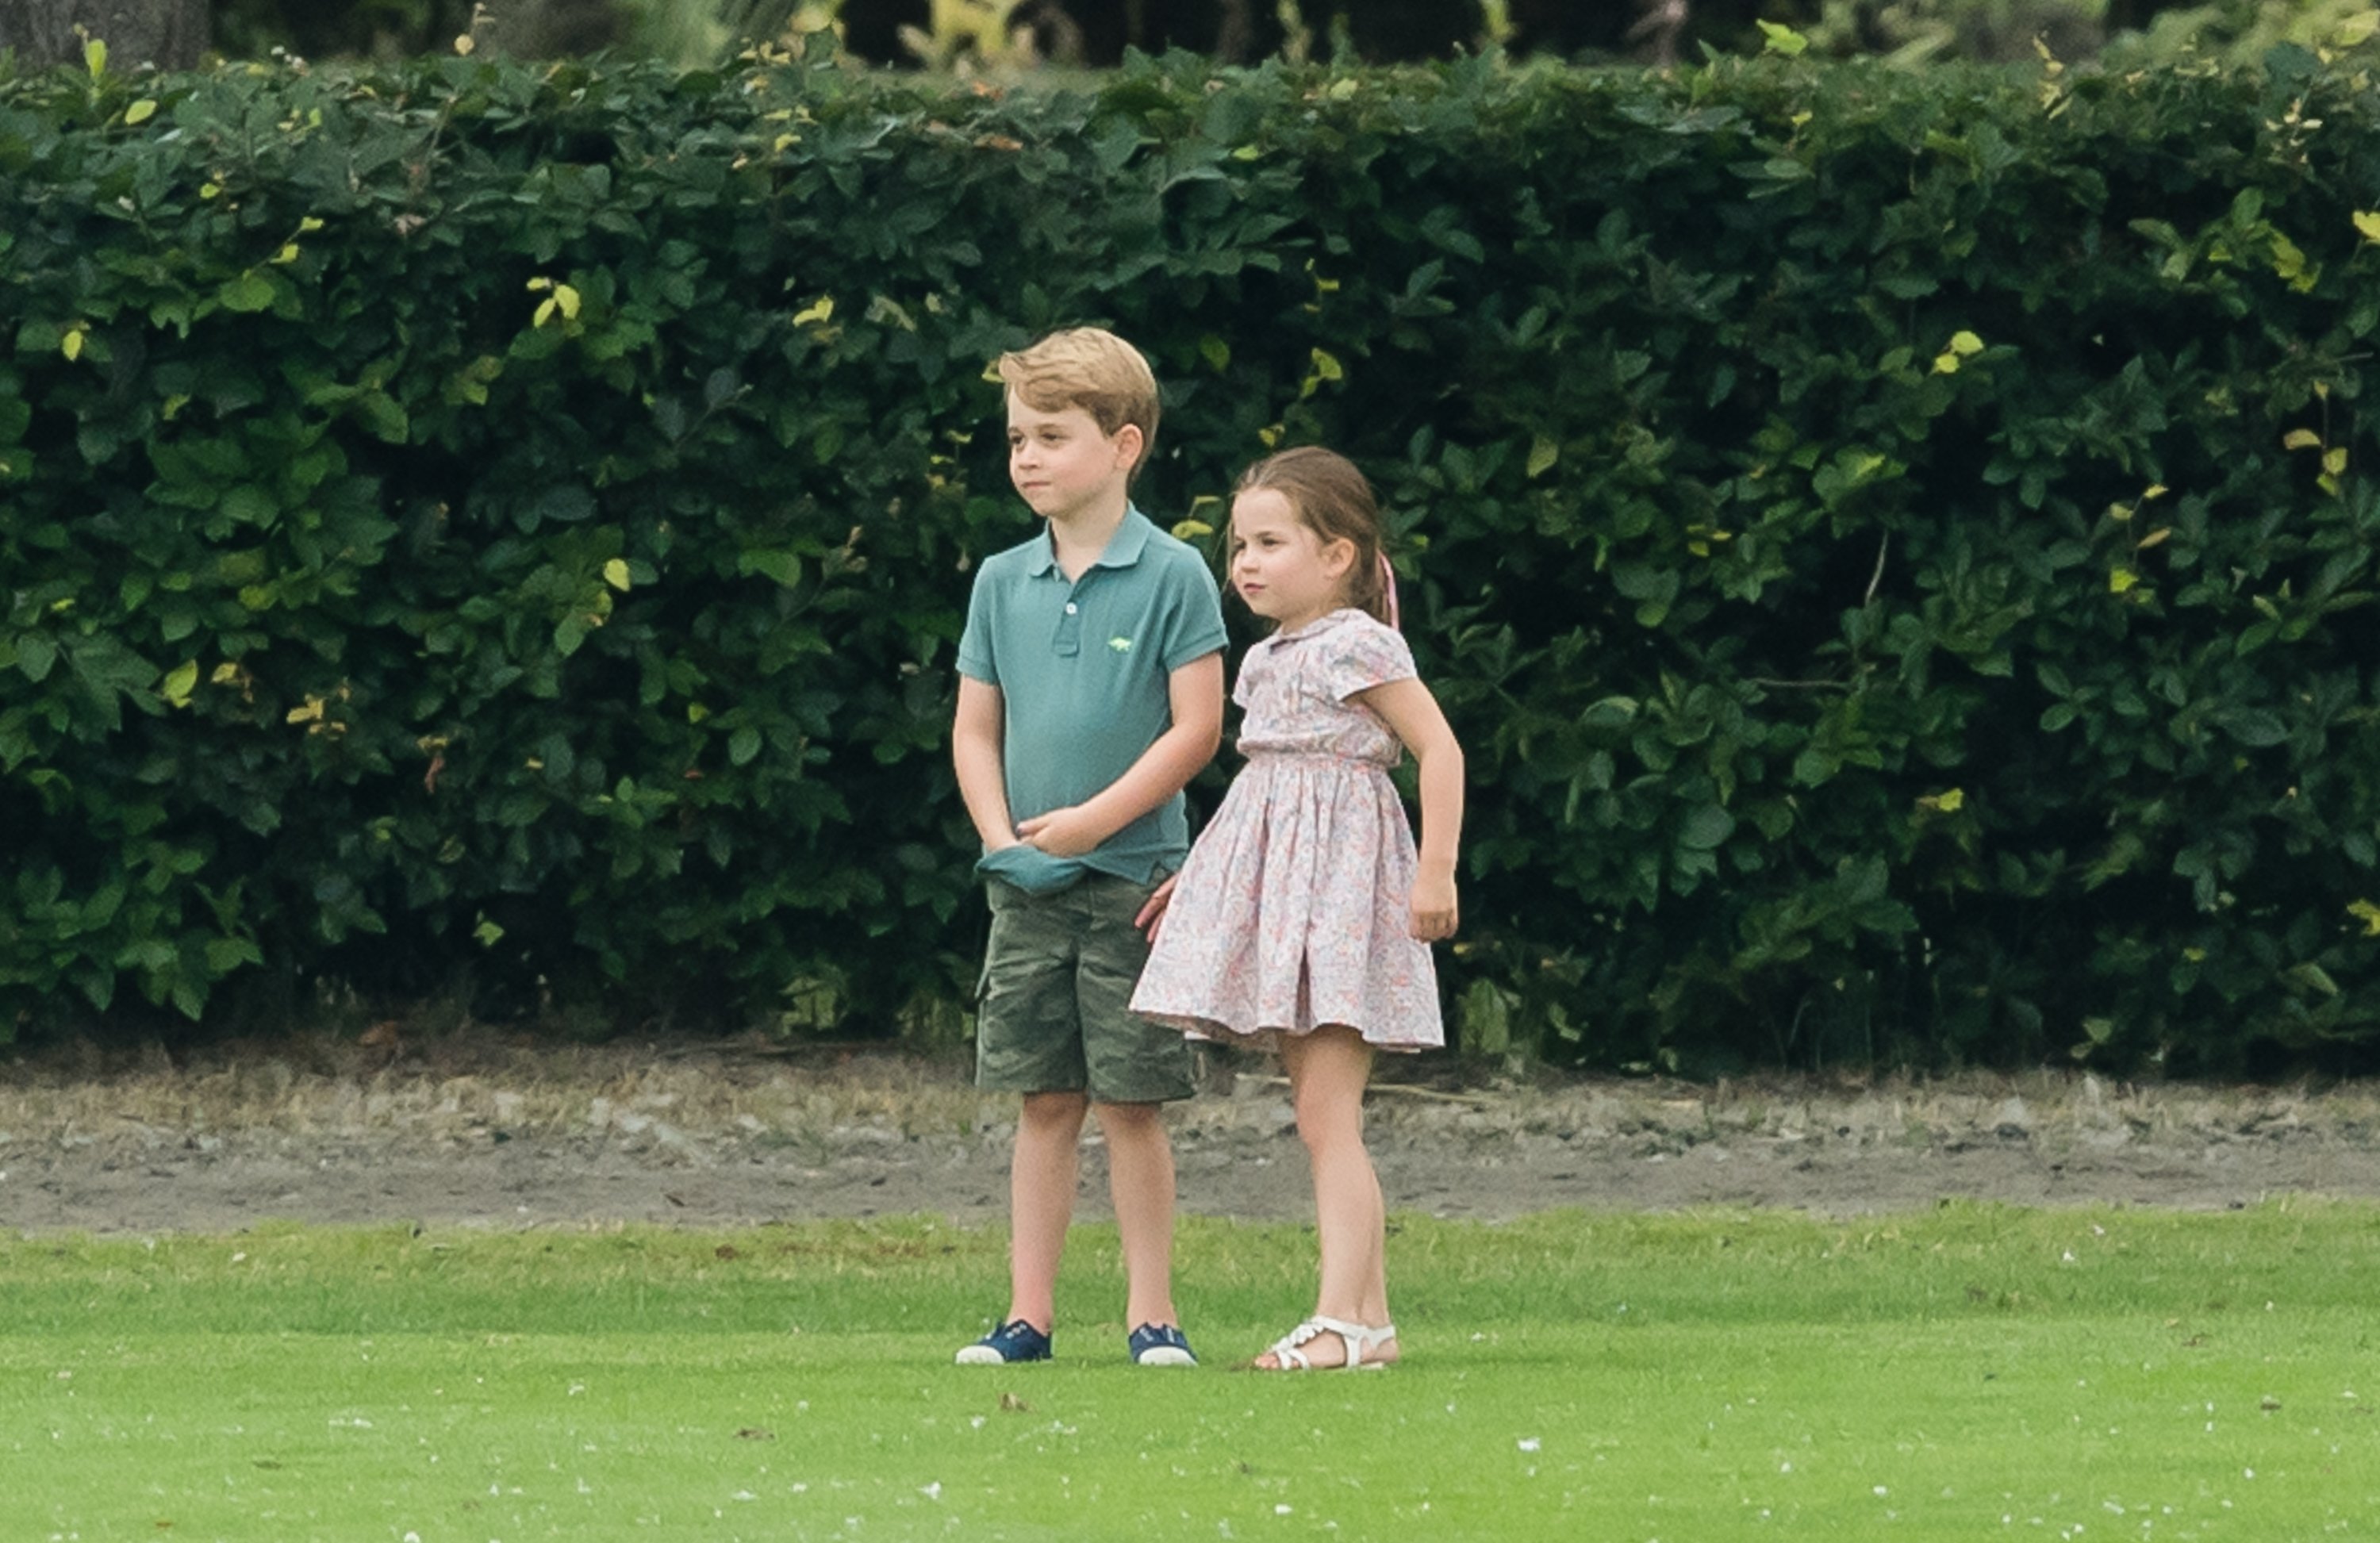 Prince George and Princess Charlotte attend The King Power Royal Charity Polo Day at Billingbear Polo Club on July 10, 2019 in Wokingham, England. | Source: Getty Images